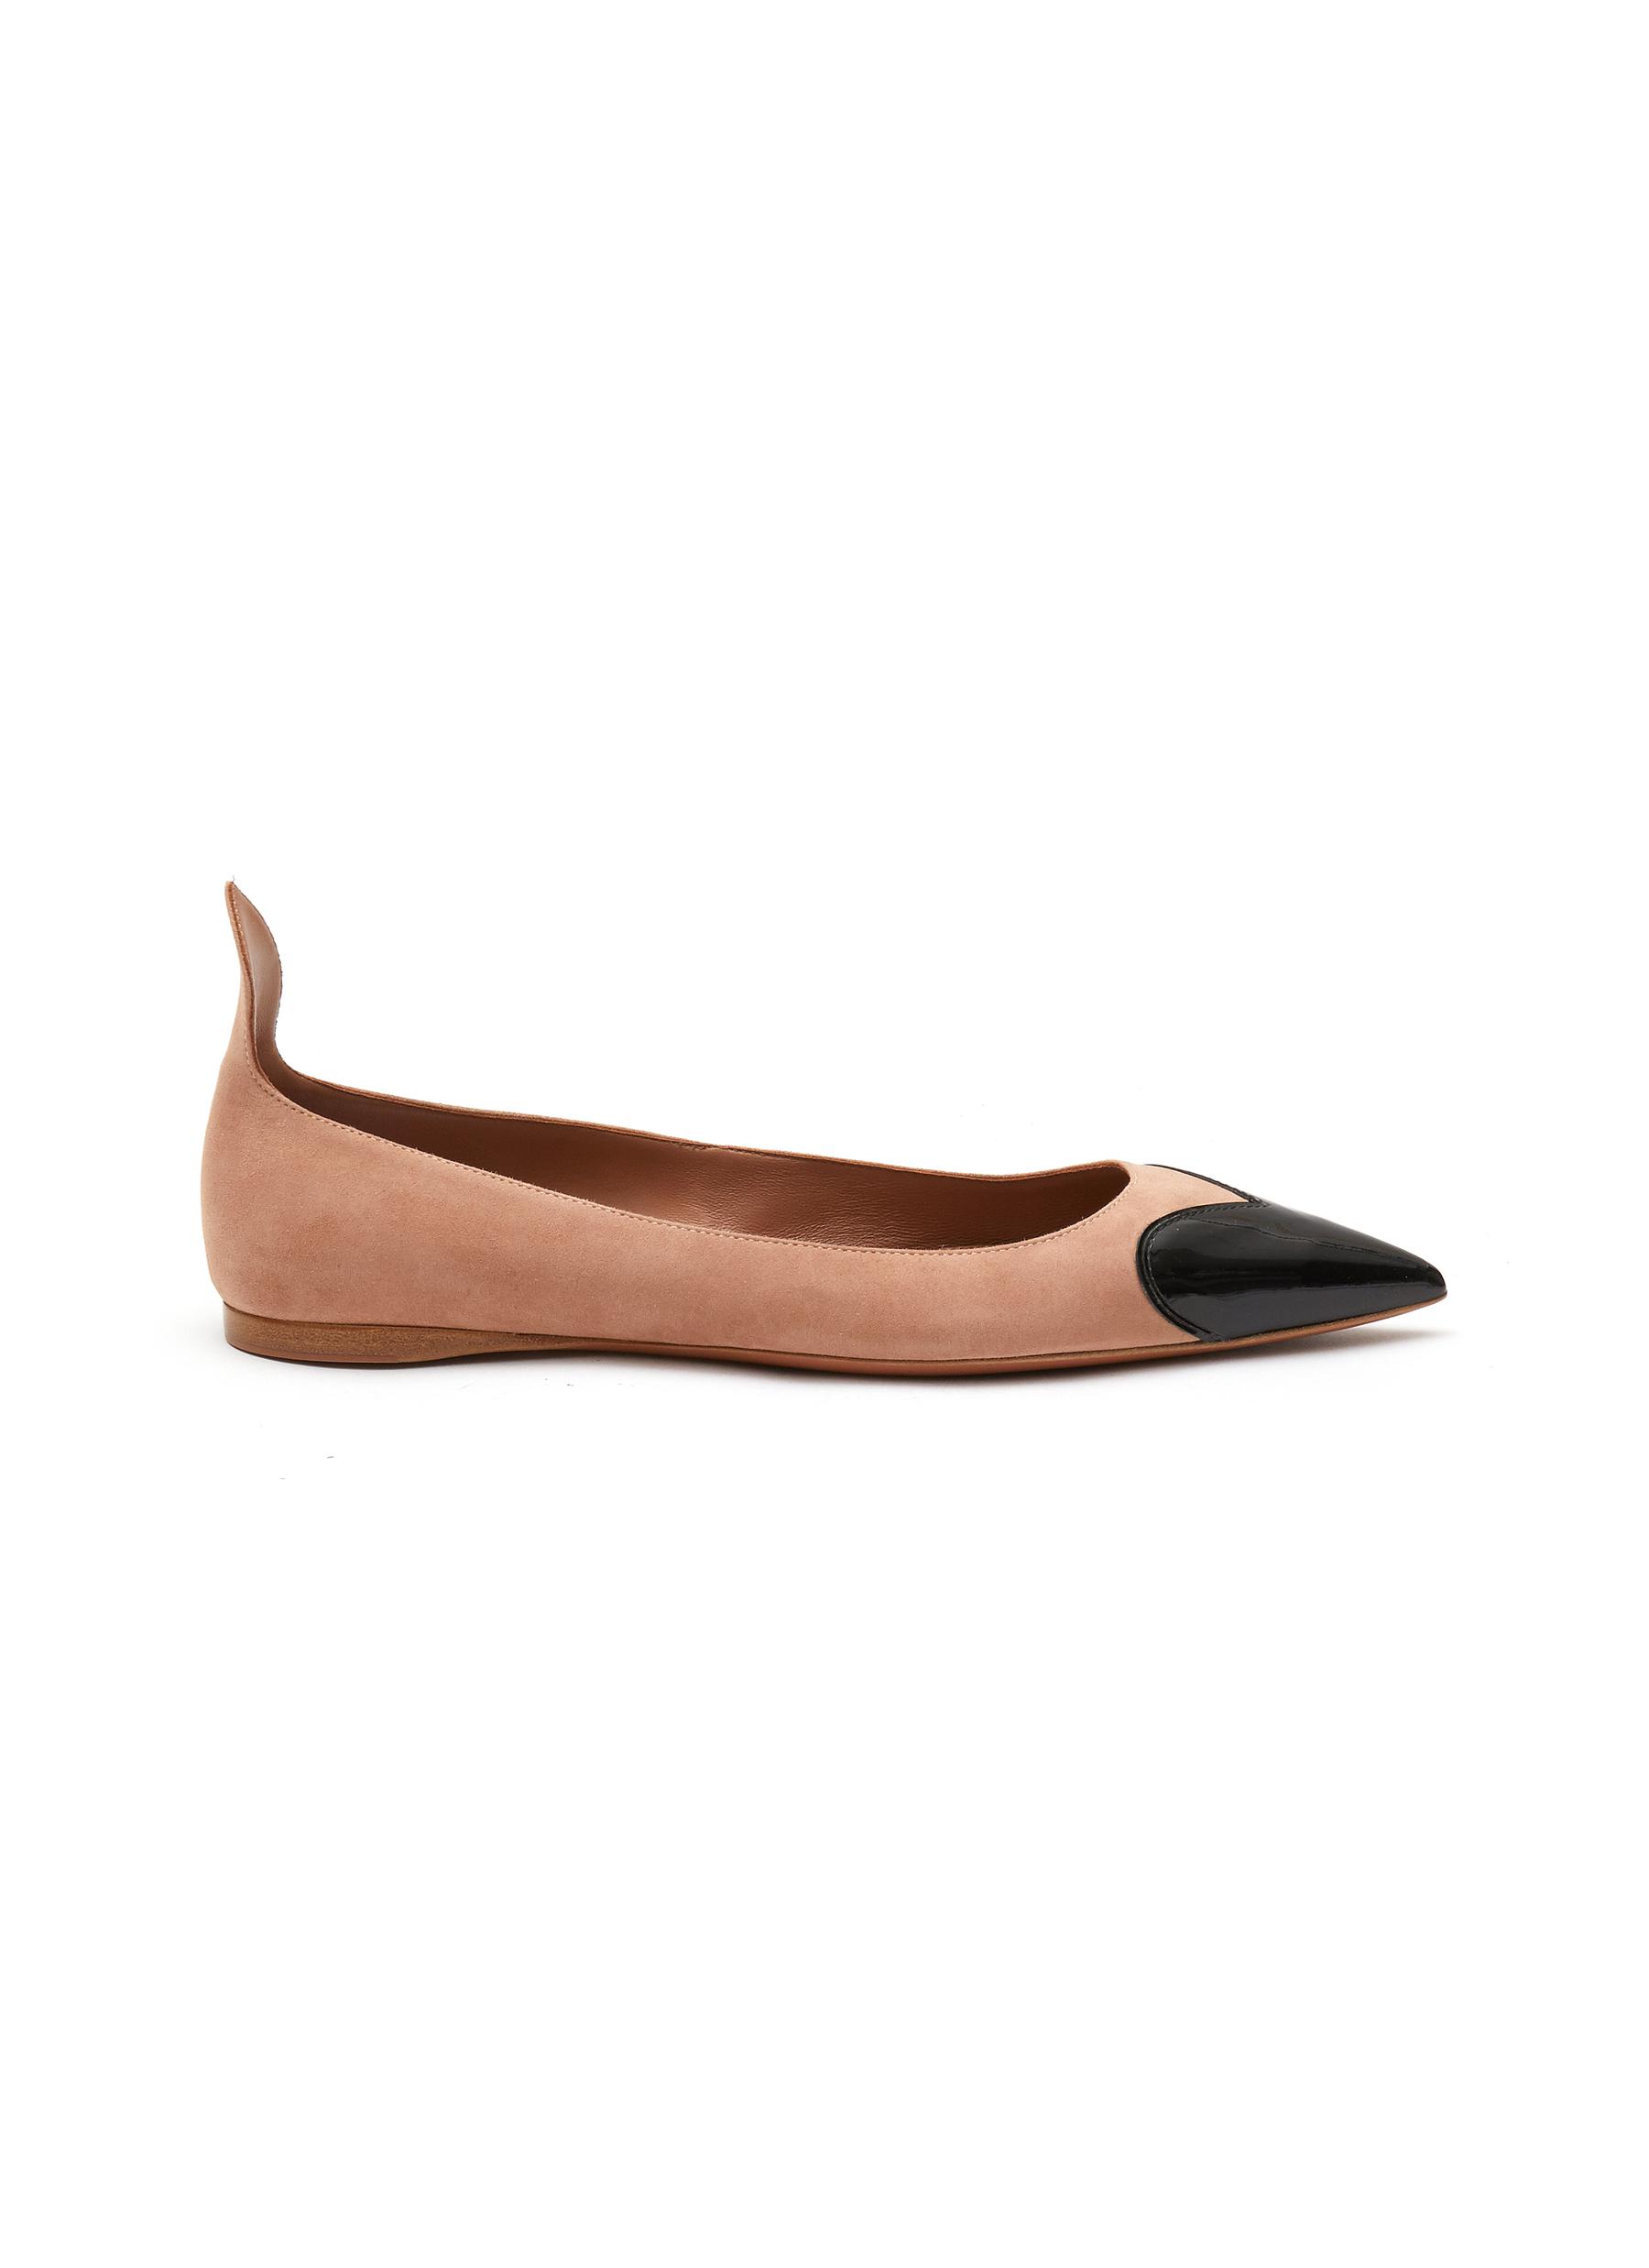 â€˜COEUR’ POINT TOE PATENT LEATHER SUEDE BALLERINA FLATS